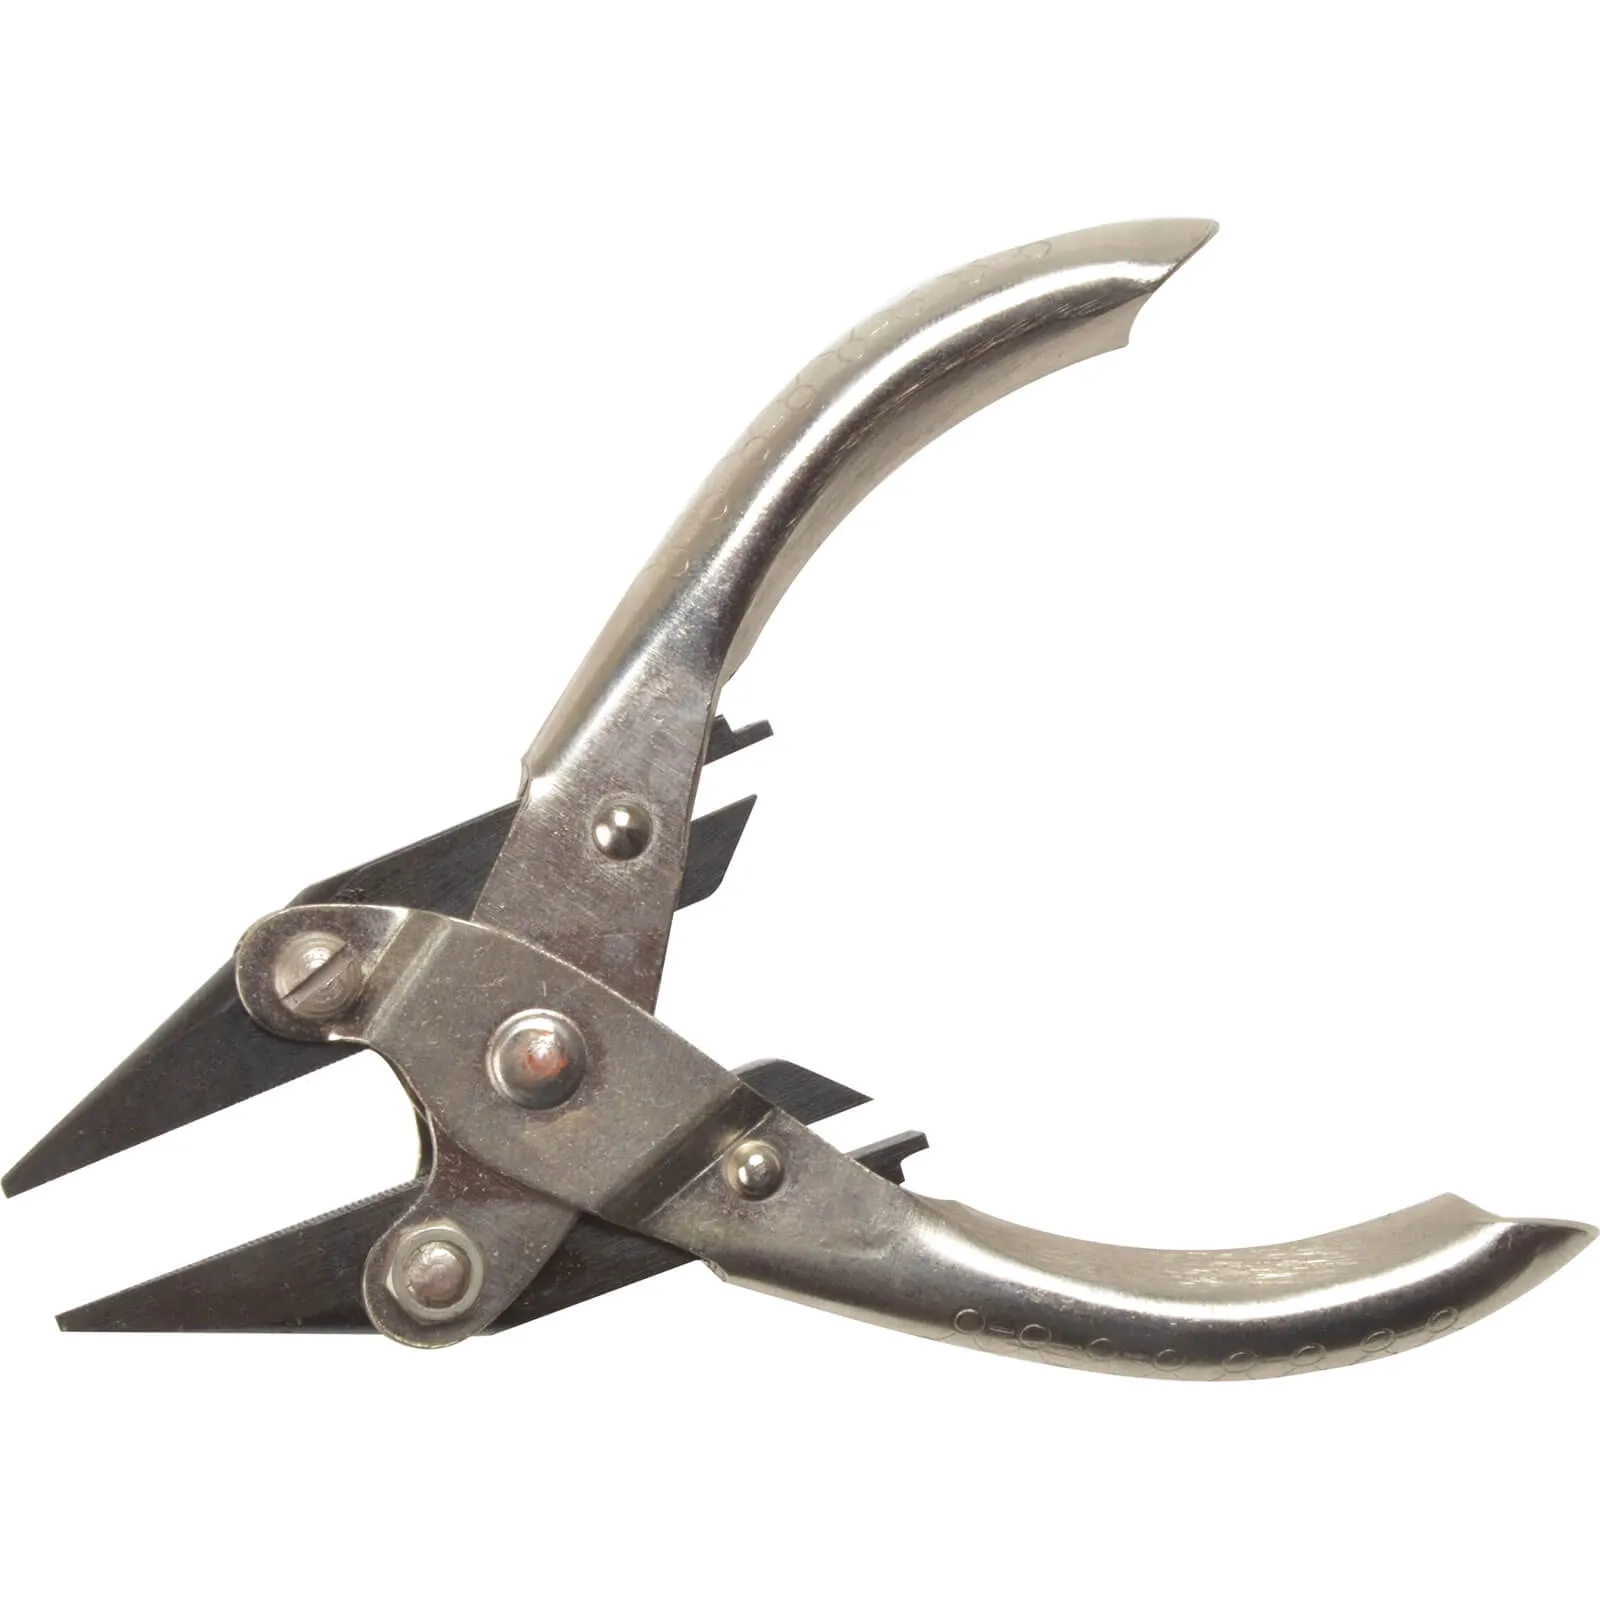 Maun Snipe Nose Serrated Jaws Pliers - 125mm